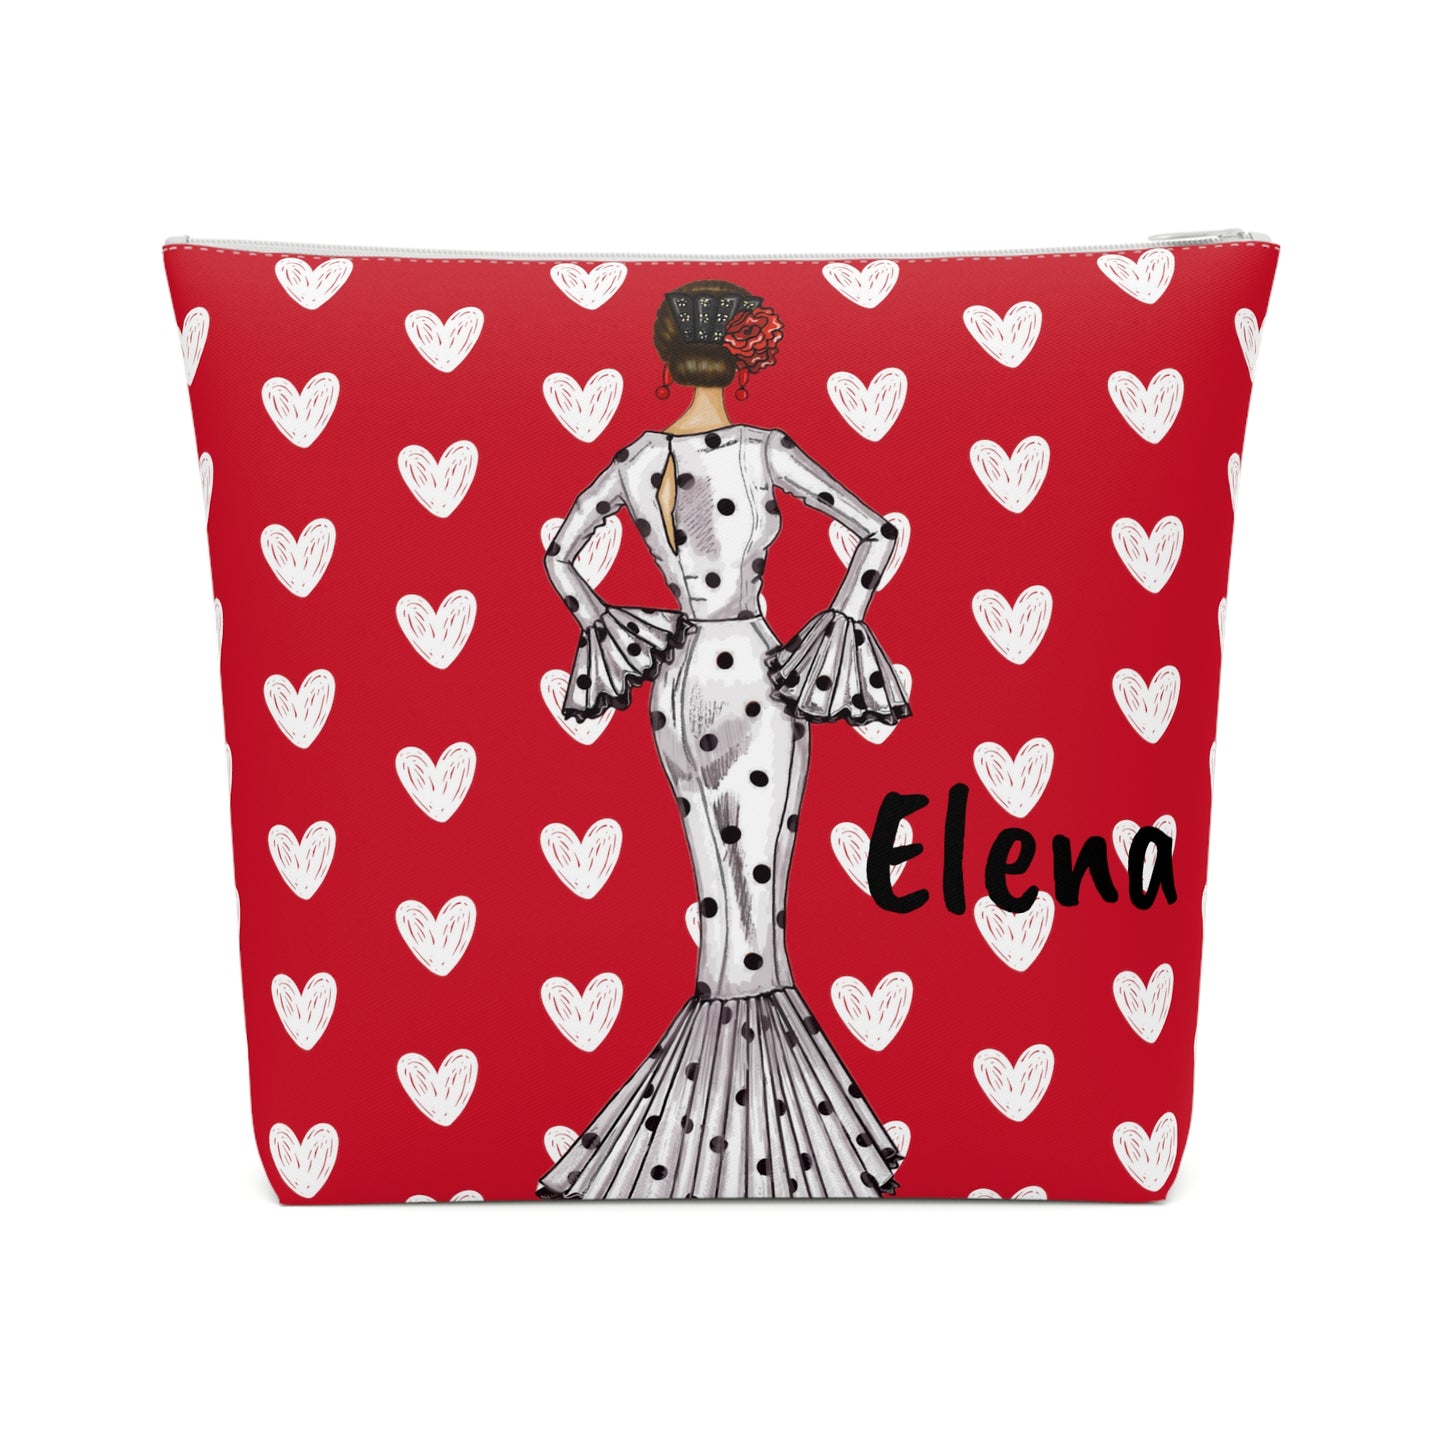 a red cosmetic bag with a dalmatian doll on it